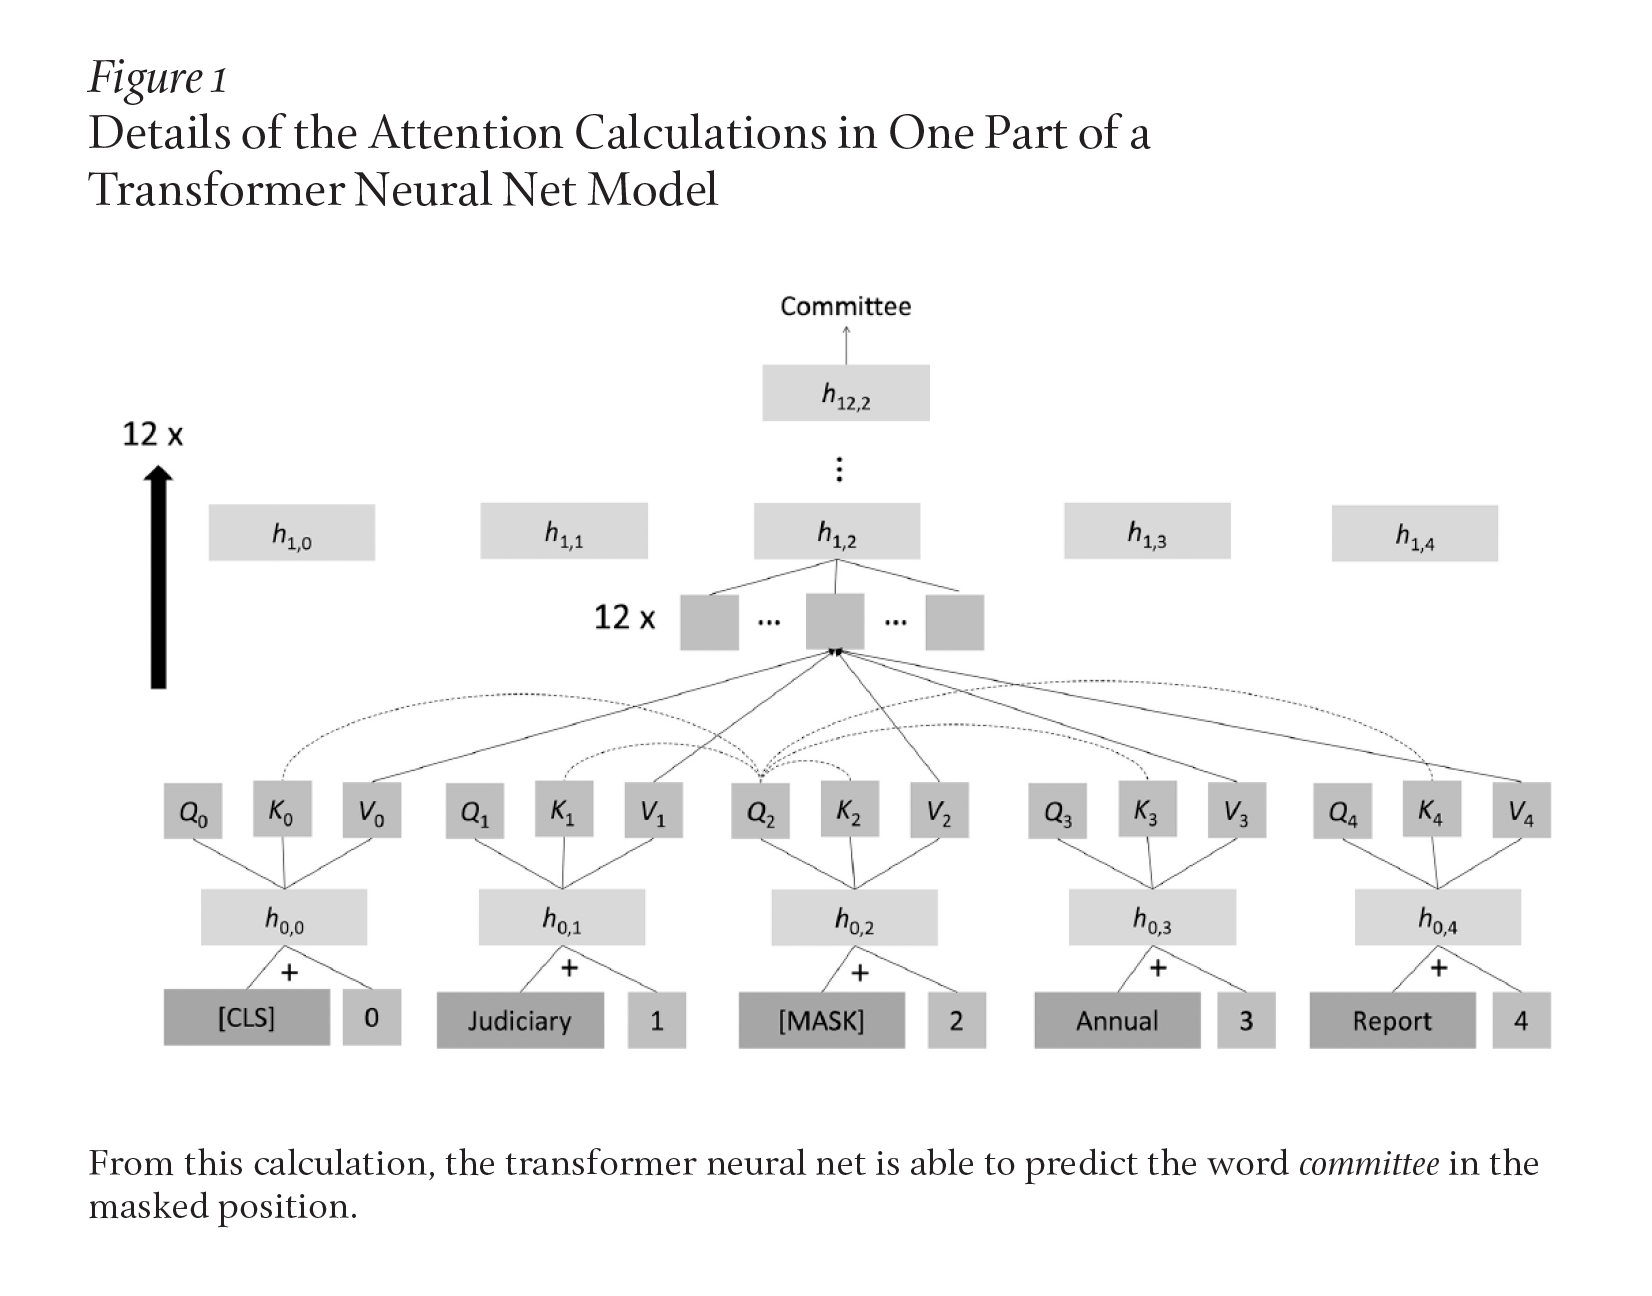 Details of the Attention Calculations in One Part of a Transformer Neural Net Model